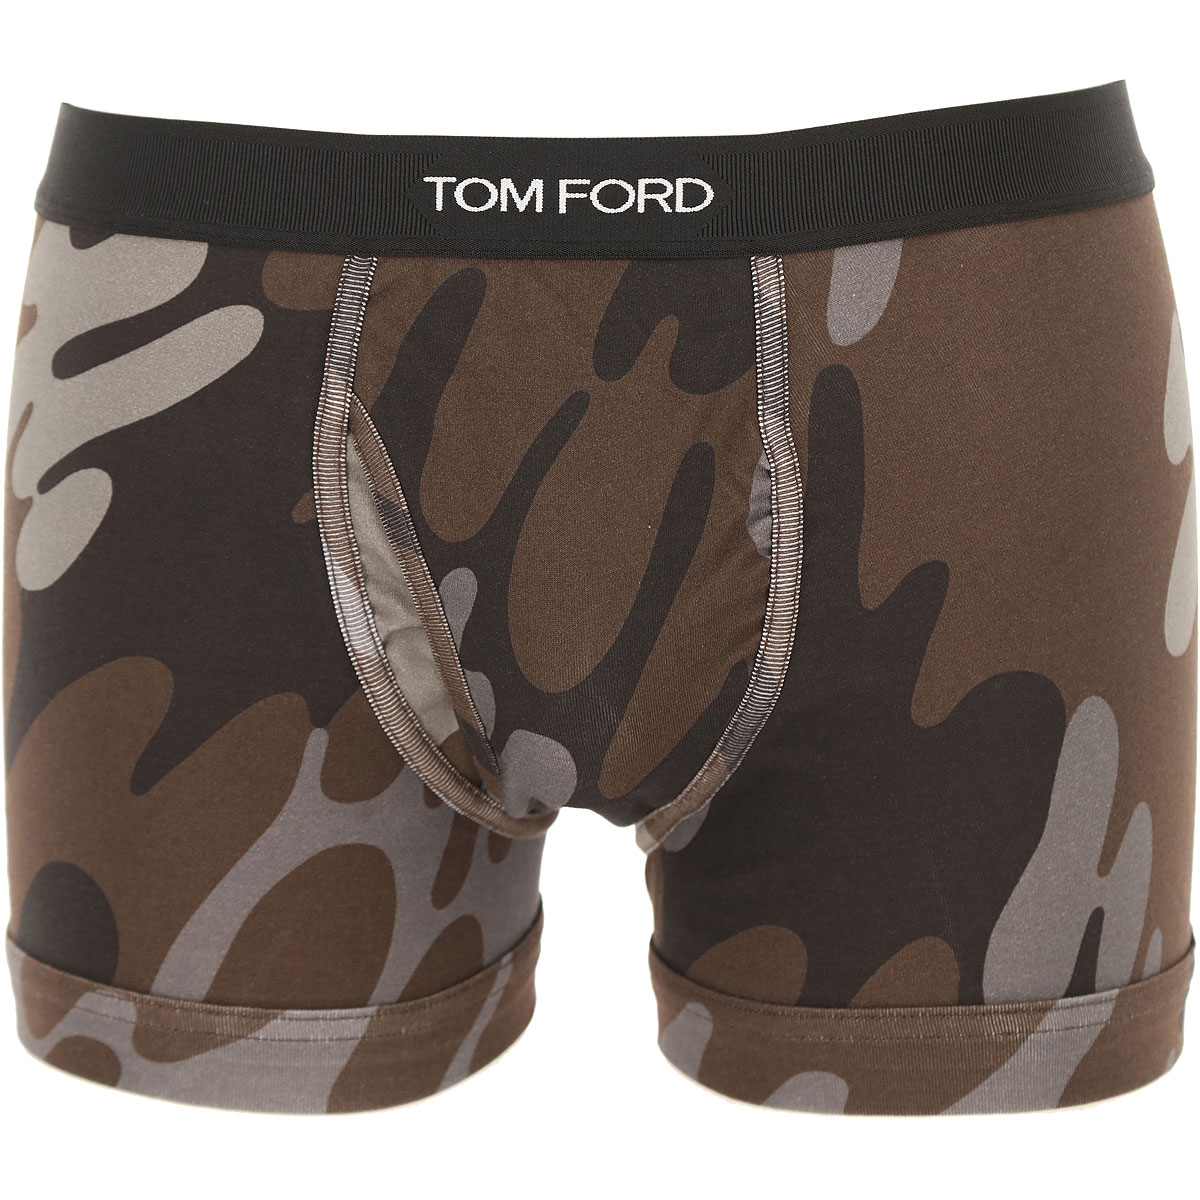 Mens Underwear Tom Ford, Style code: t4lc3-1150-028